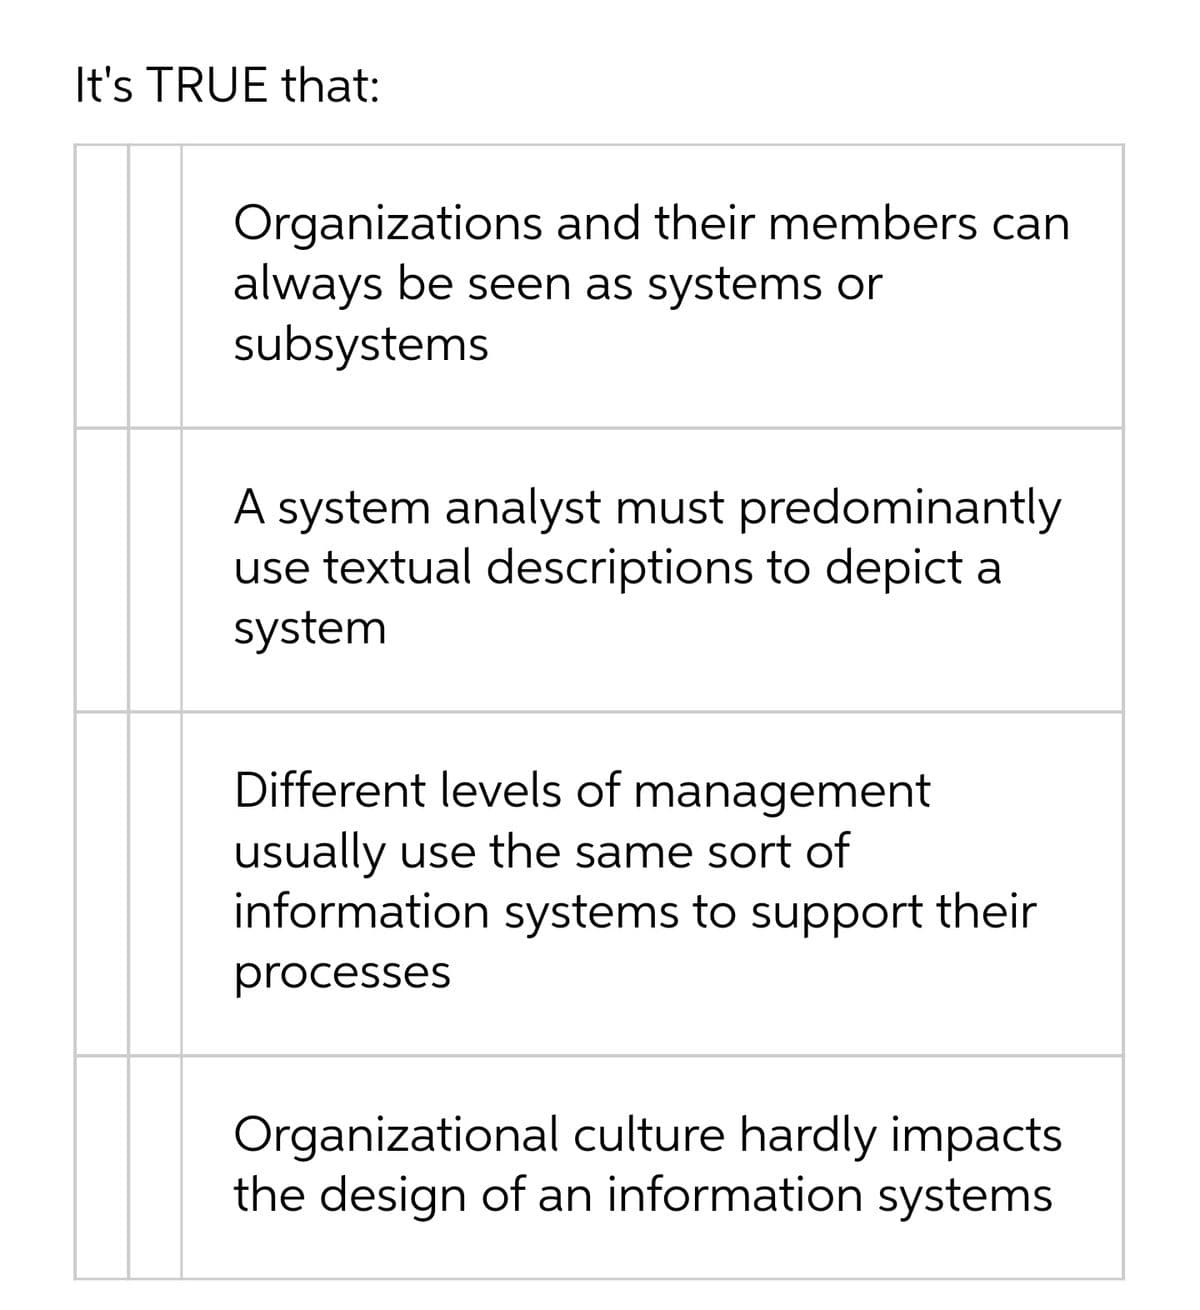 It's TRUE that:
Organizations and their members can
always be seen as systems or
subsystems
A system analyst must predominantly
use textual descriptions to depict a
system
Different levels of management
usually use the same sort of
information systems to support their
processes
Organizational culture hardly impacts
the design of an information systems
